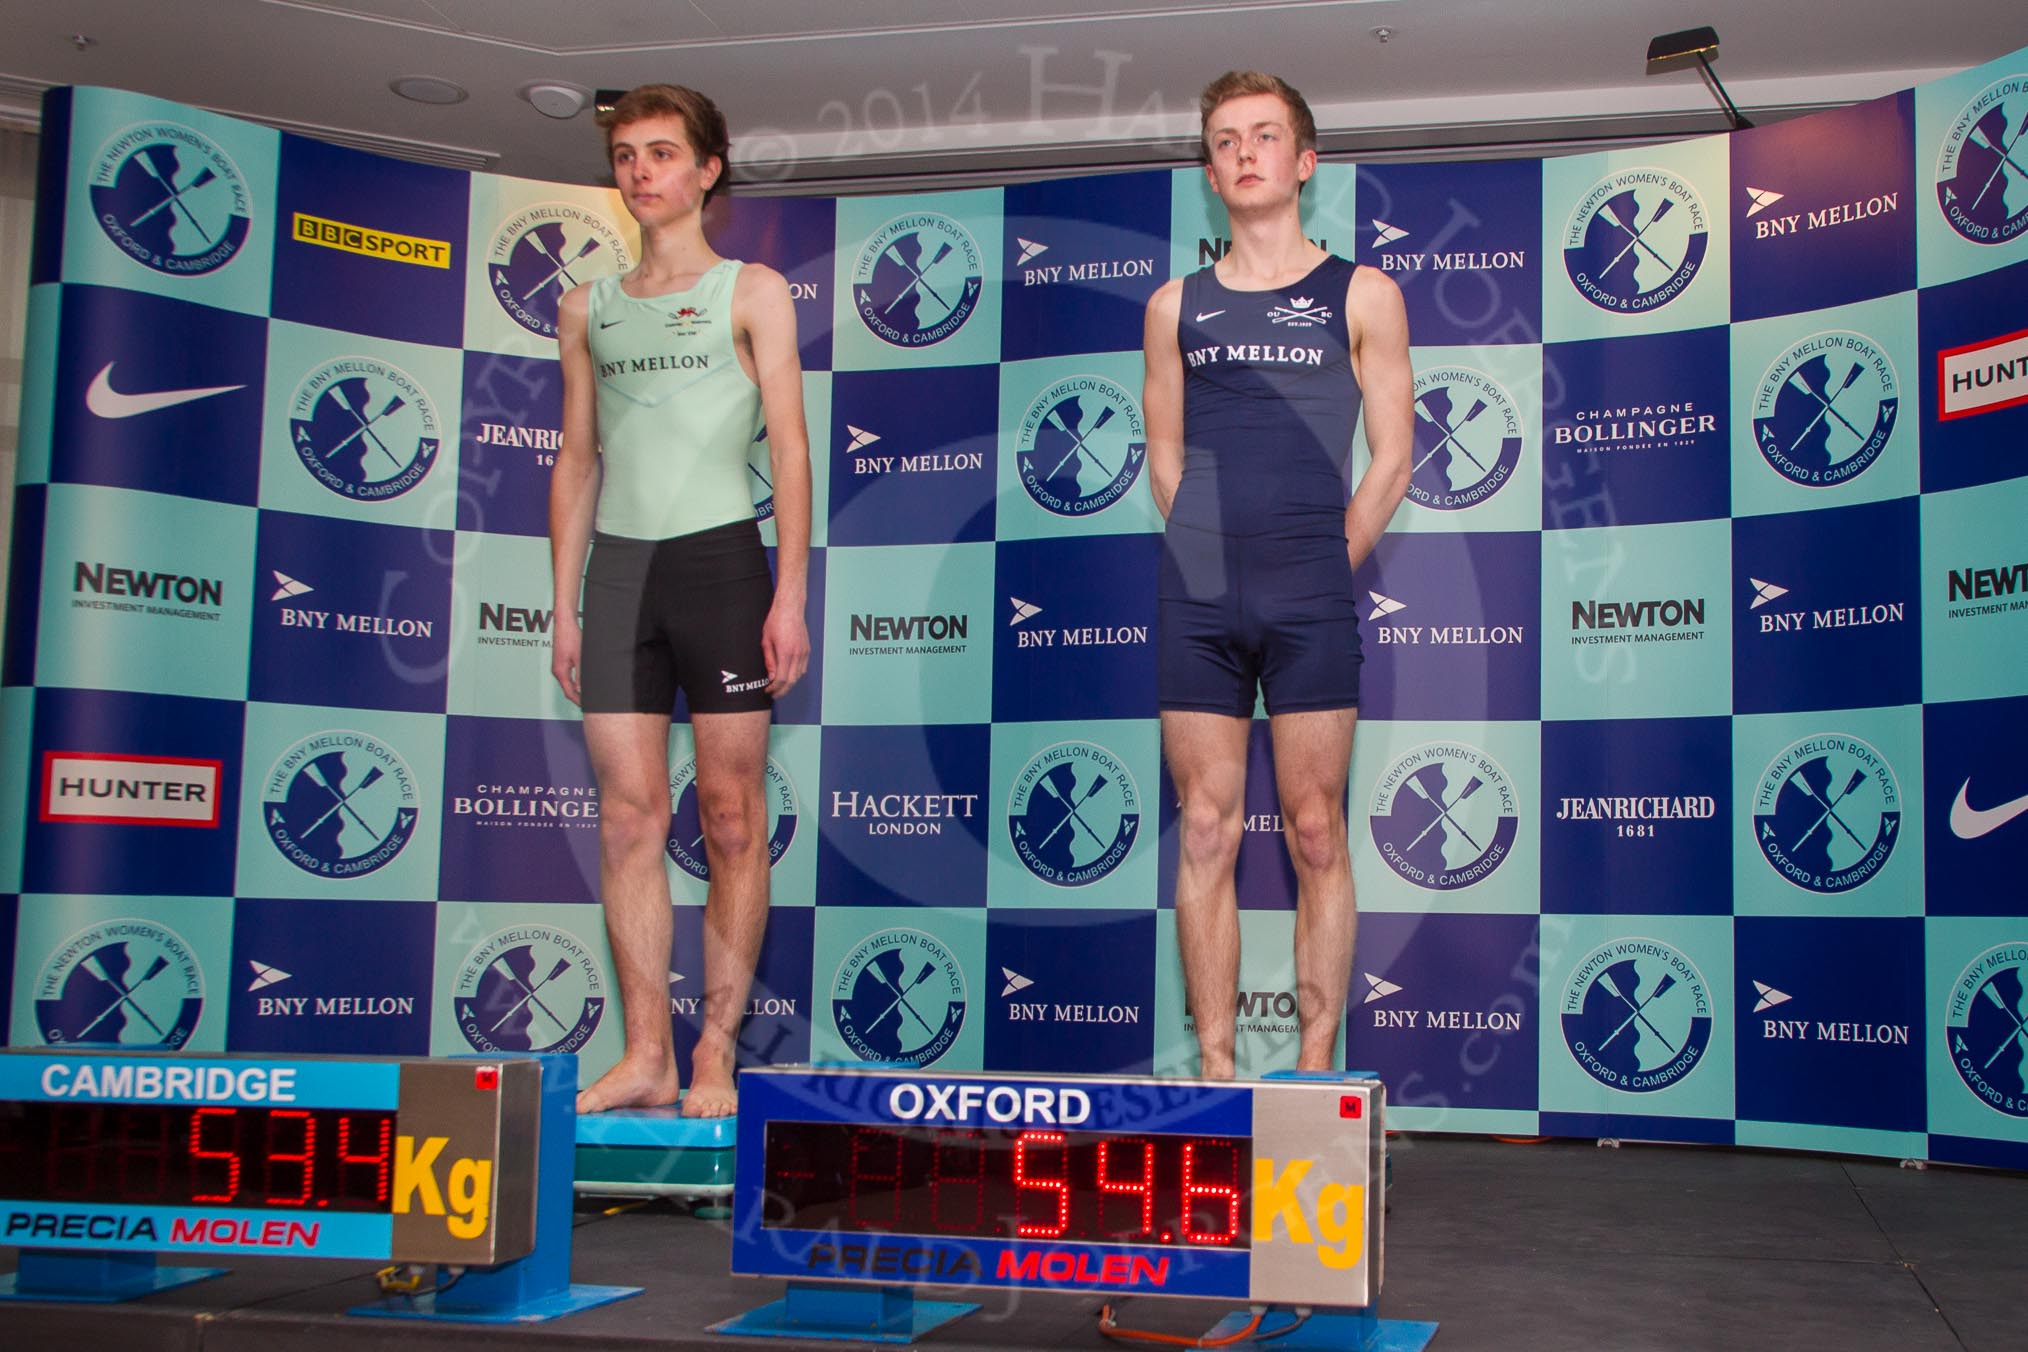 The Boat Race season 2014 - Crew Announcement and Weigh In: The 2014 Boat Race crews, Cambridge cox Ian Middleton and Oxford cox Laurence Harvey..
BNY Mellon Centre,
London EC4V 4LA,
London,
United Kingdom,
on 10 March 2014 at 12:05, image #115